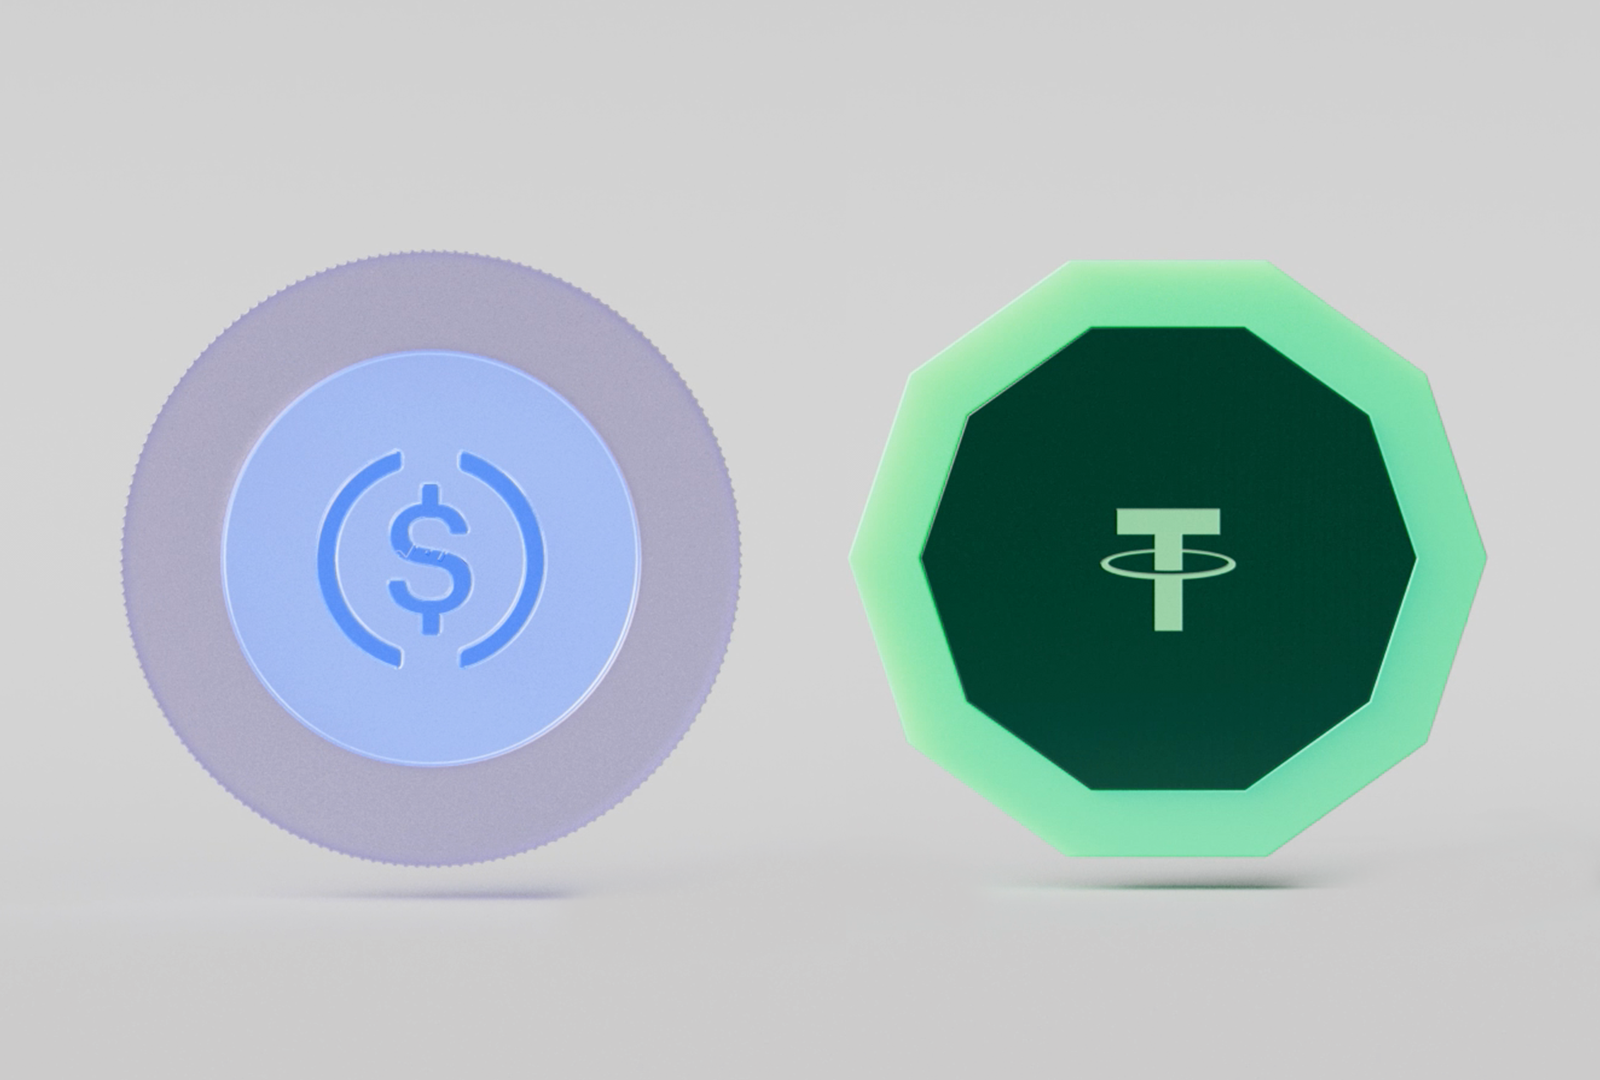 Comparing and contrasting the two stablecoin, USDT and USDC